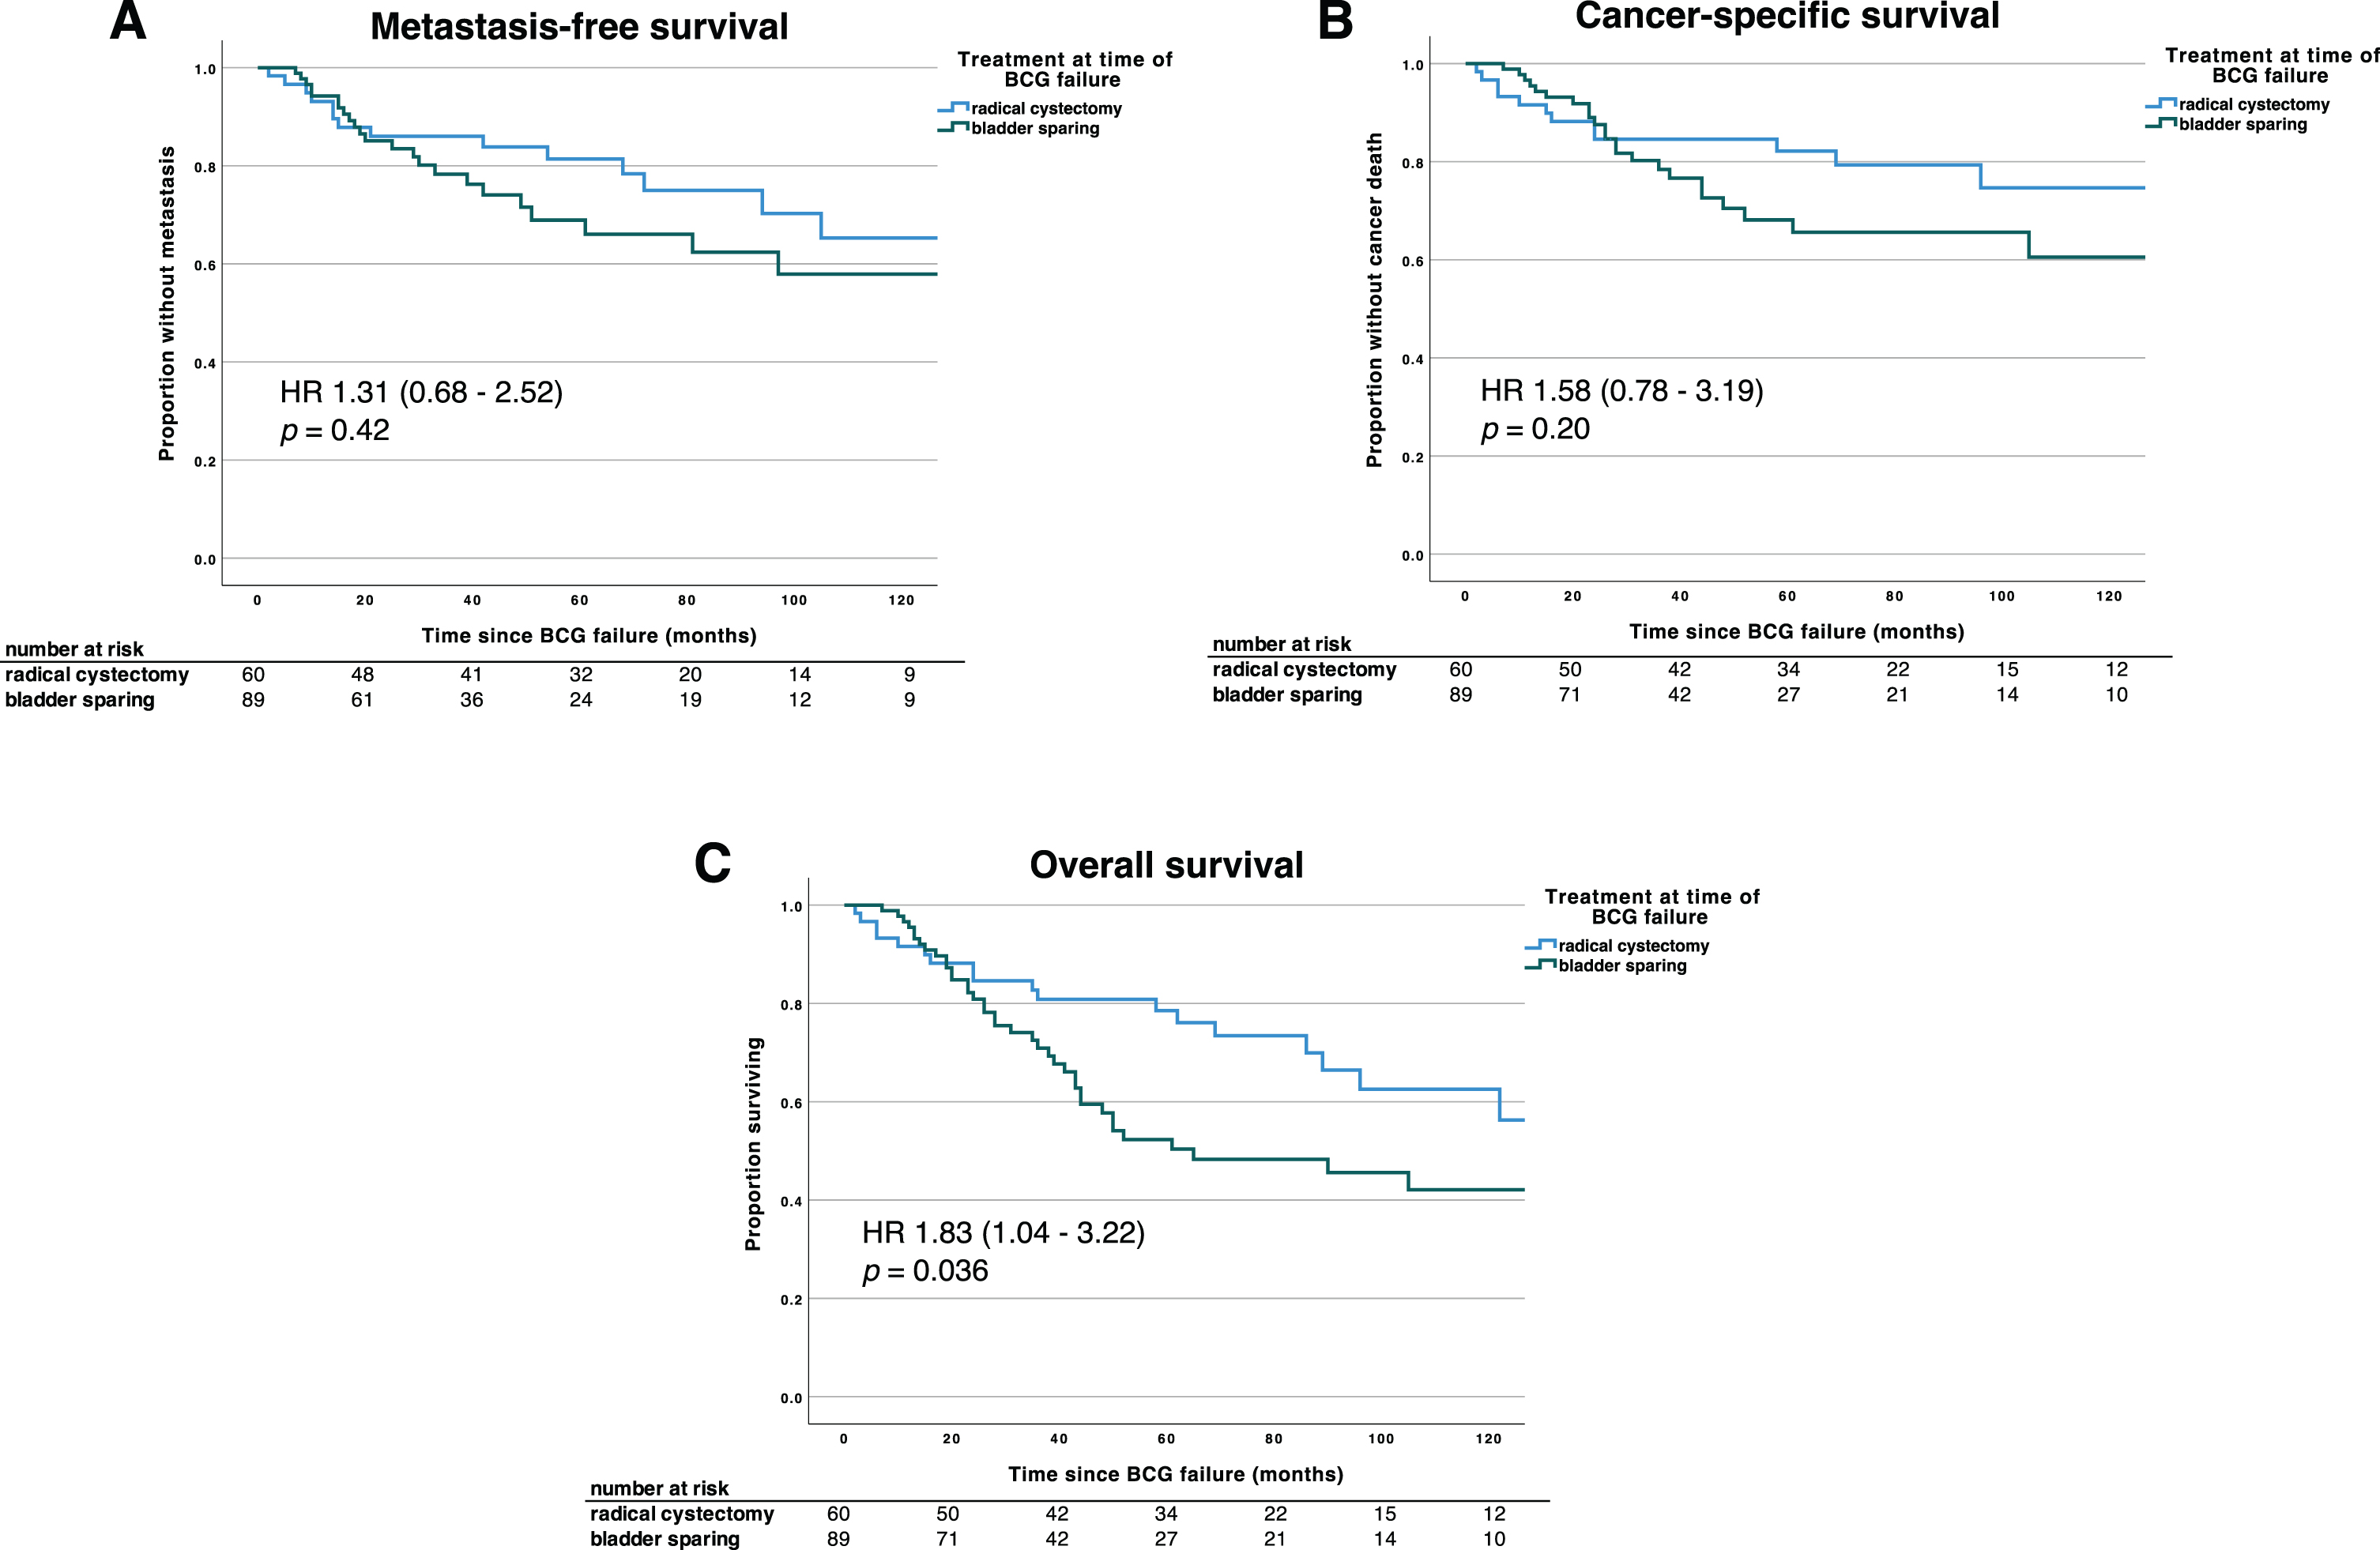 Oncologic outcomes of patients with BCG-unresponsive NMIBC. Kaplan-Meier curves showing metastasis-free (A), cancer-specific (B) and overall survival (C) of patients with BCG-unresponsive NMIBC opting for either upfront cystectomy or initial bladder-sparing management at the time of BCG unresponsive disease (“BCG failure”). Metastasis-free and cancer-specific survival did not differ significantly between the two groups (HR for MFS 1.30, 95% CI 0.68–2.52, p = 0.42; HR for CSS 1.58, 95% CI 0.78–3.19, p = 0.20), whereas overall survival was greater among patients undergoing initial RC (HR 1.83, 95% CI 1.04–3.22, p = 0.036). Abbreviations: BCG, bacillus Calmette-Guérin; CI, confidence interval; CSS, cancer-specific survival; HR, hazard ratio; MFS, metastasis-free survival; NMIBC, non-muscle invasive bladder cancer; OS, overall survival.